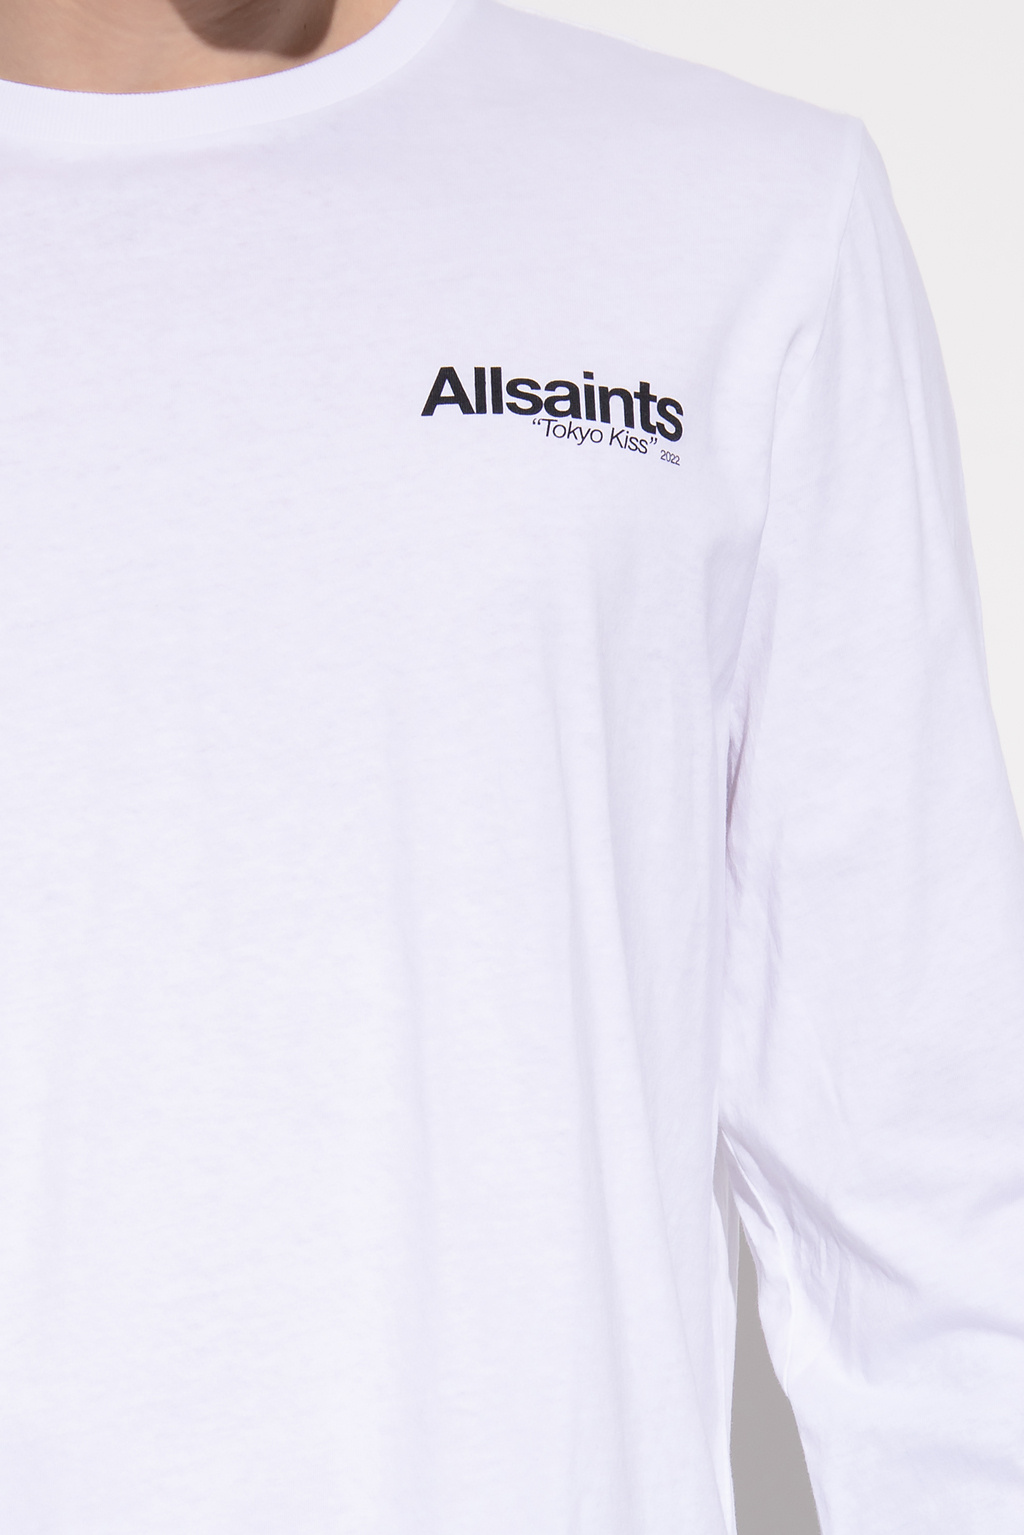 AllSaints ‘Silver’ T-shirt Sweatshirts with long sleeves